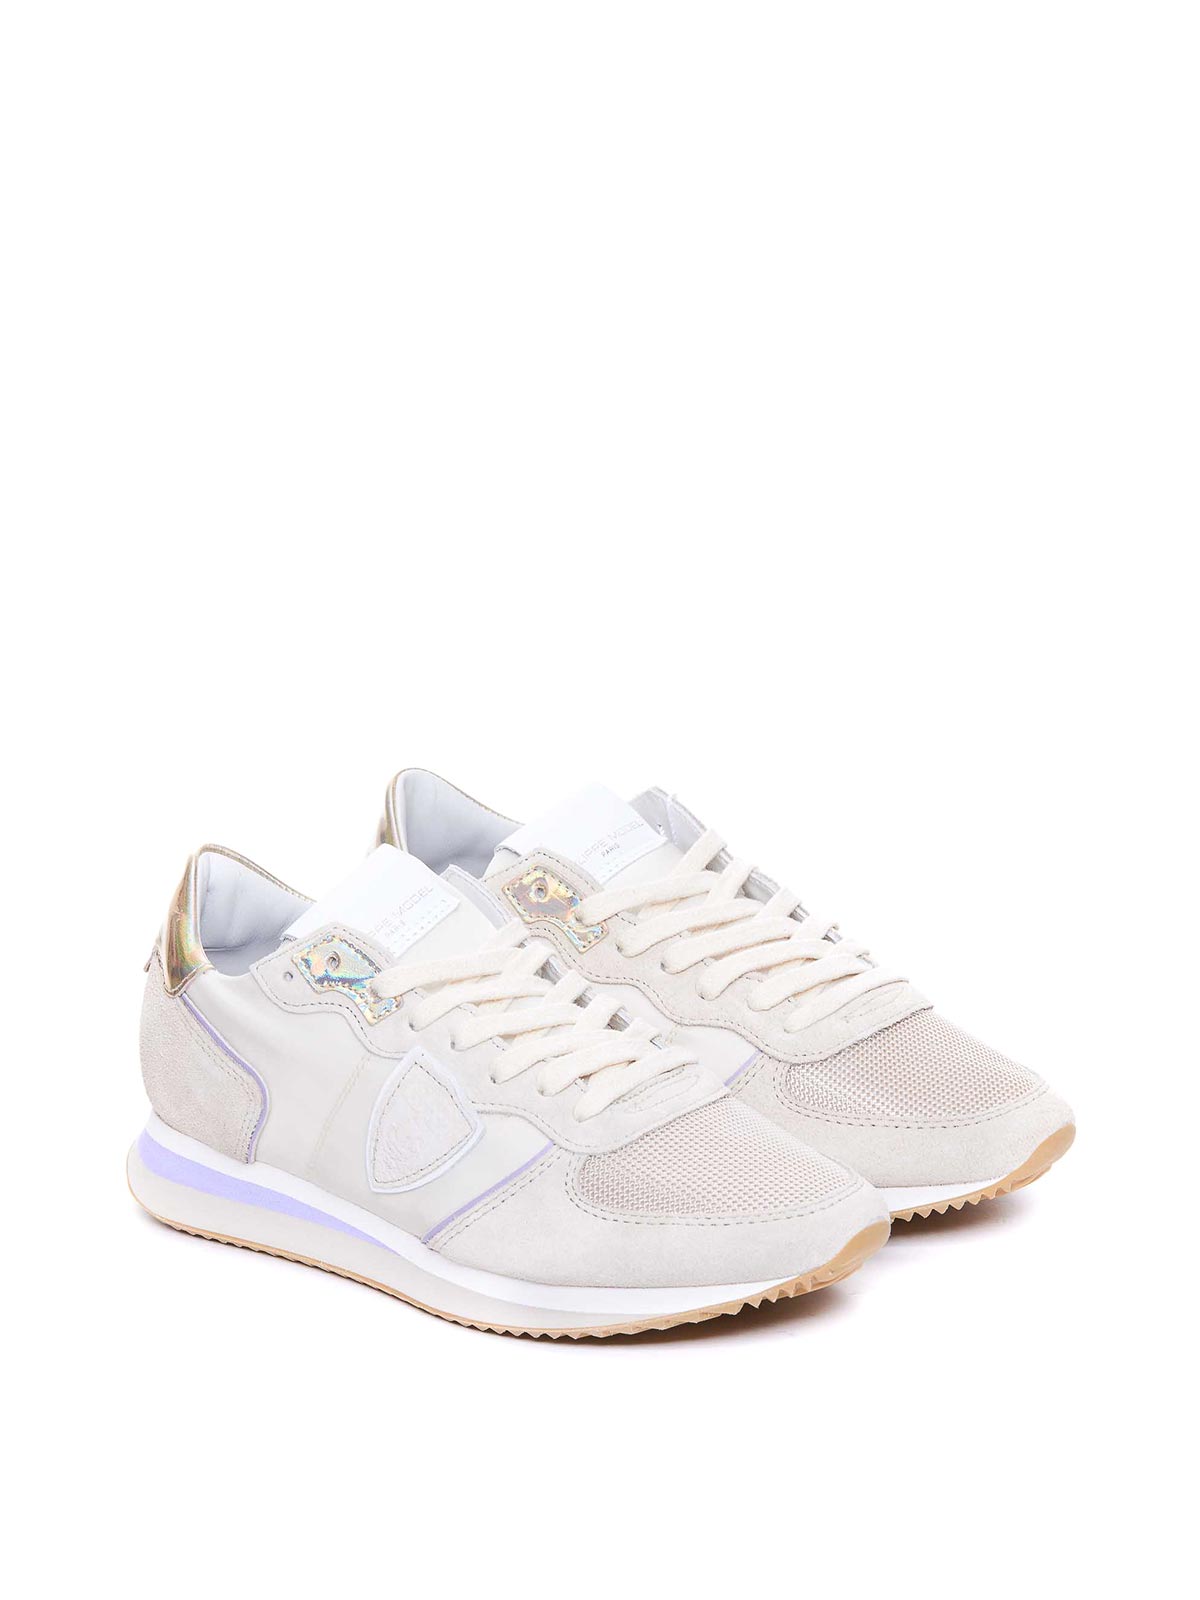 Shop Philippe Model Beige And Lilac Trpx Sneakers